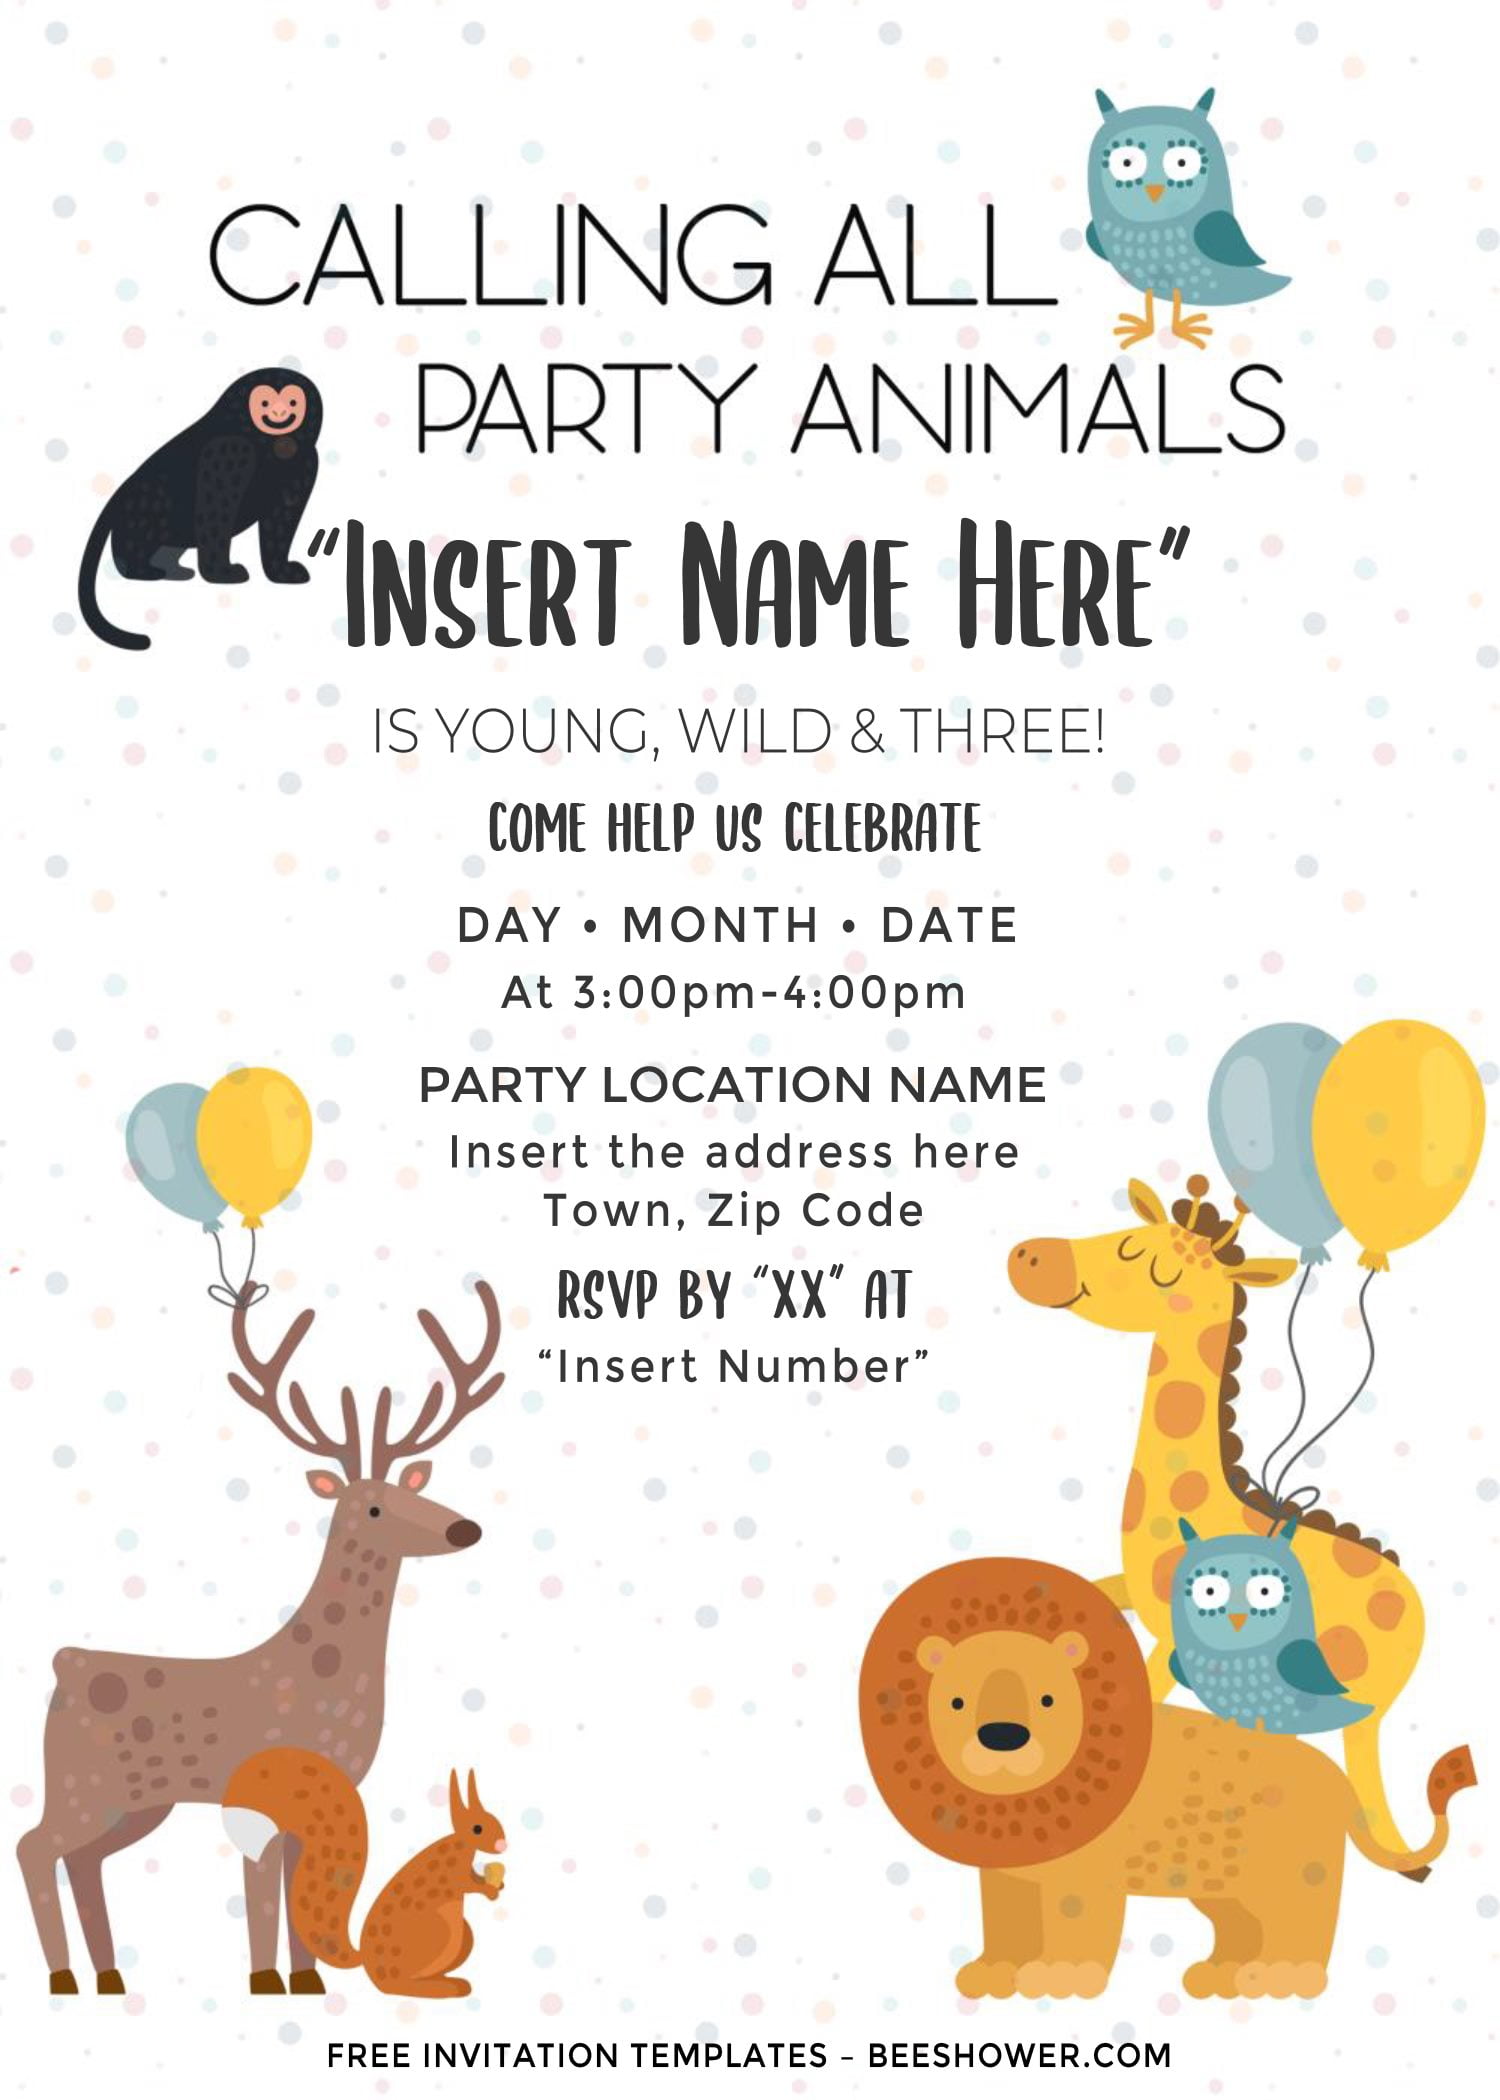 Free Cute Party Animals Baby Shower Invitation Templates For Word and has colorful balloons and portrait orientation card design